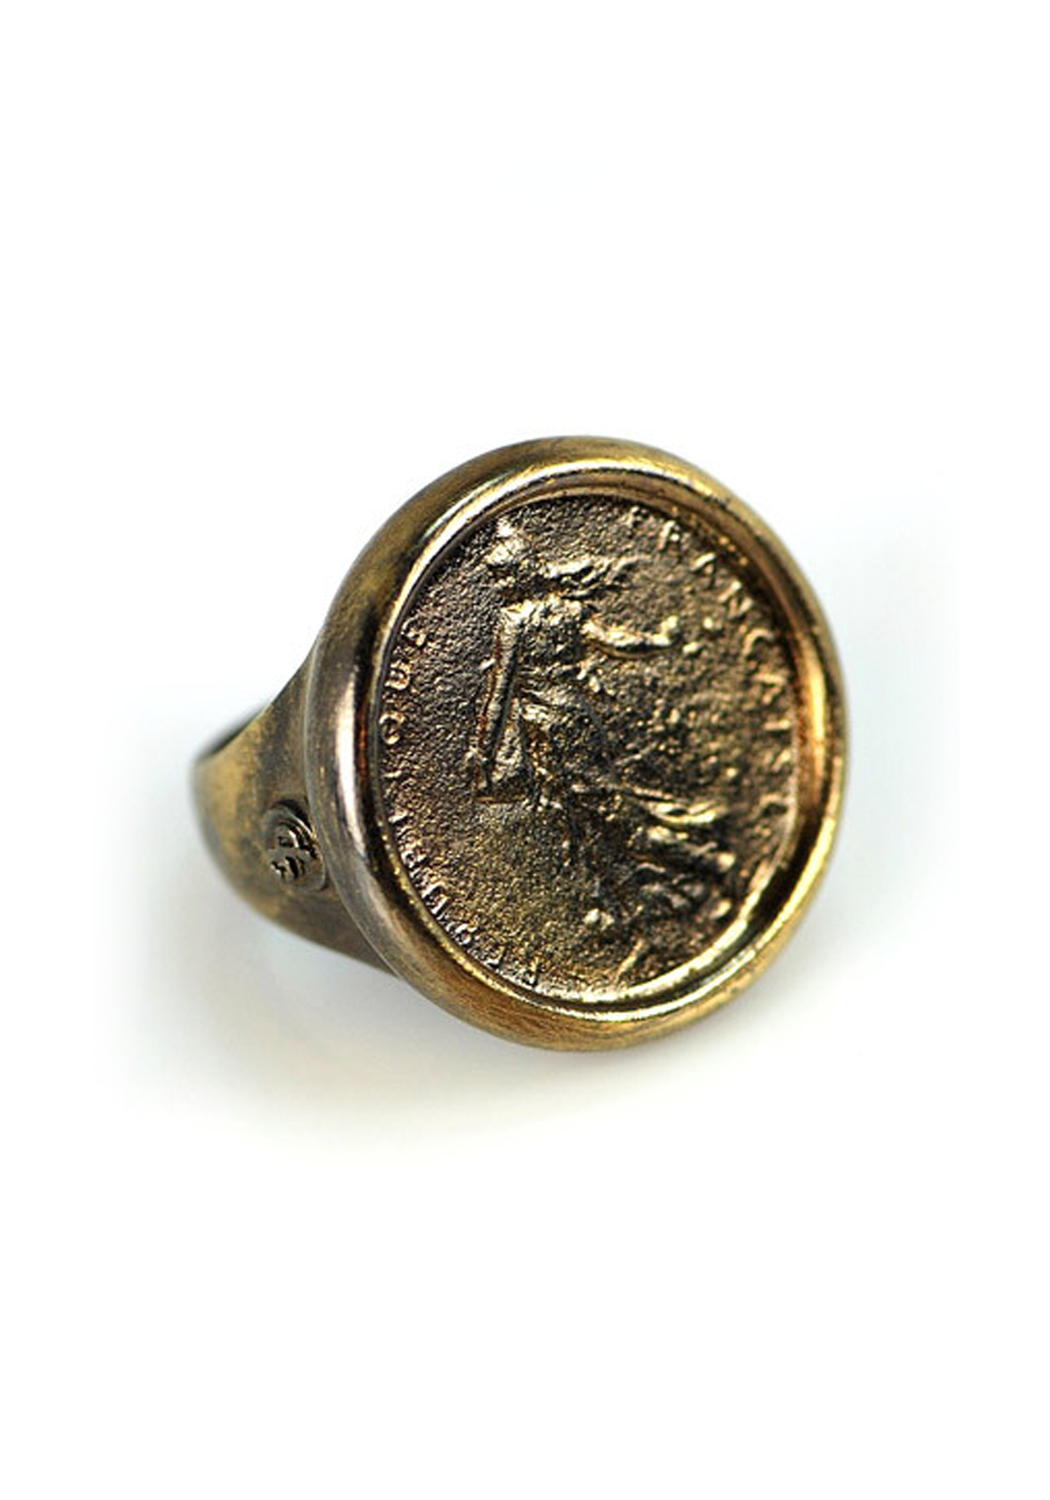 Dominique Cohen 18k Blackened Gold Goddess Coin Ring | OsterJewelers.com